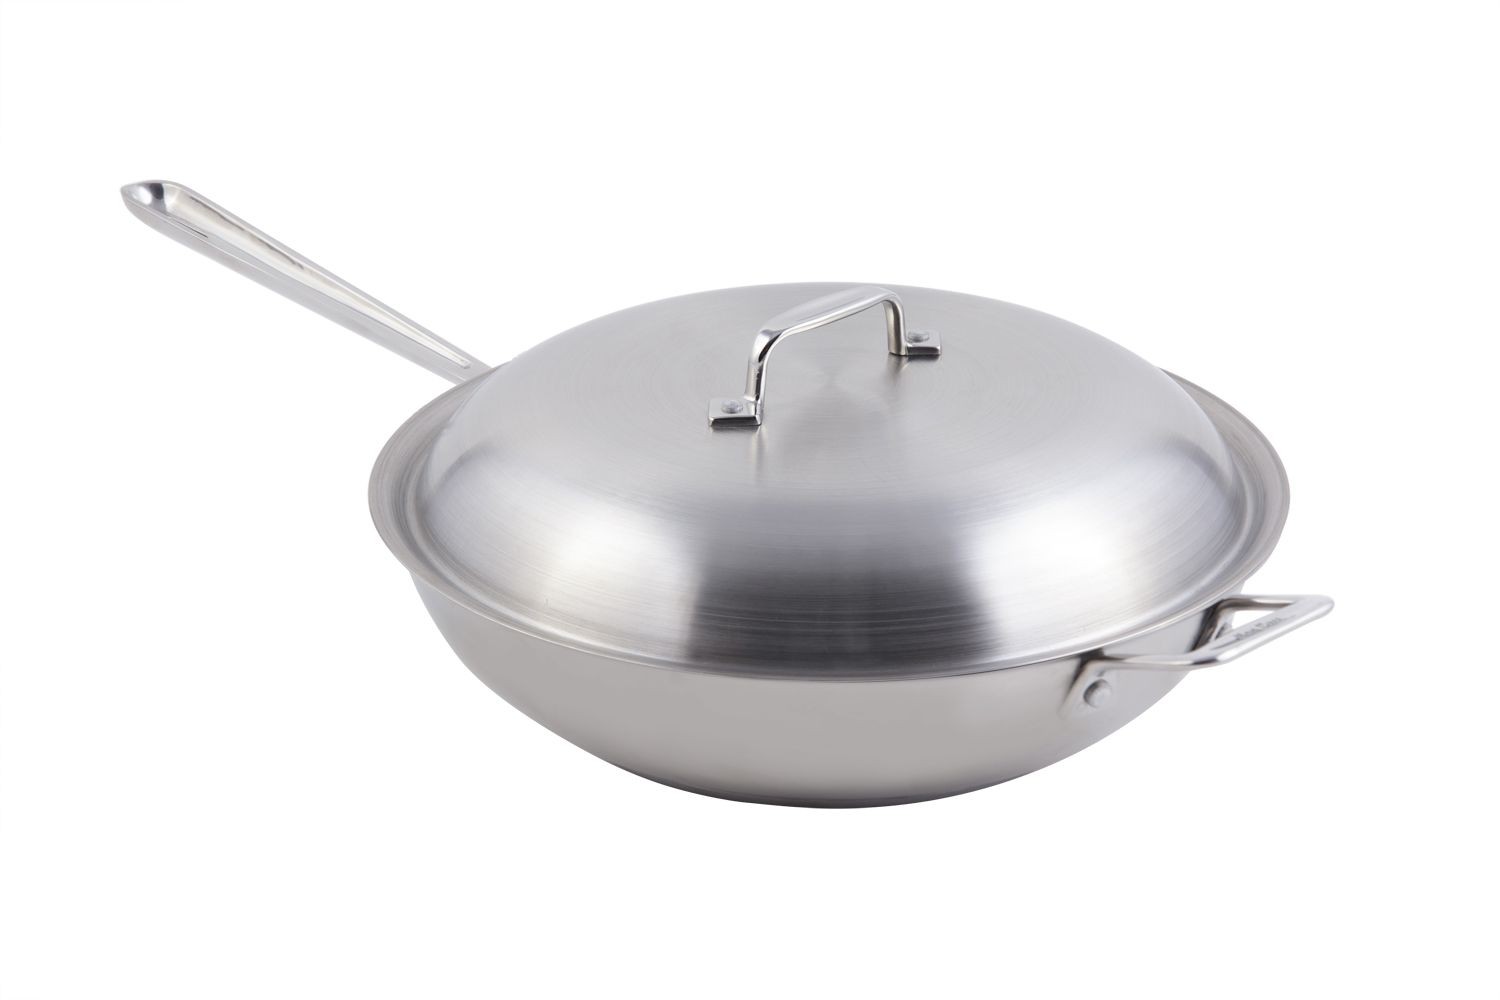 Bon Chef 60008 Stainless Steel Chef's Pan with Lid, 3 1/2 Qt.